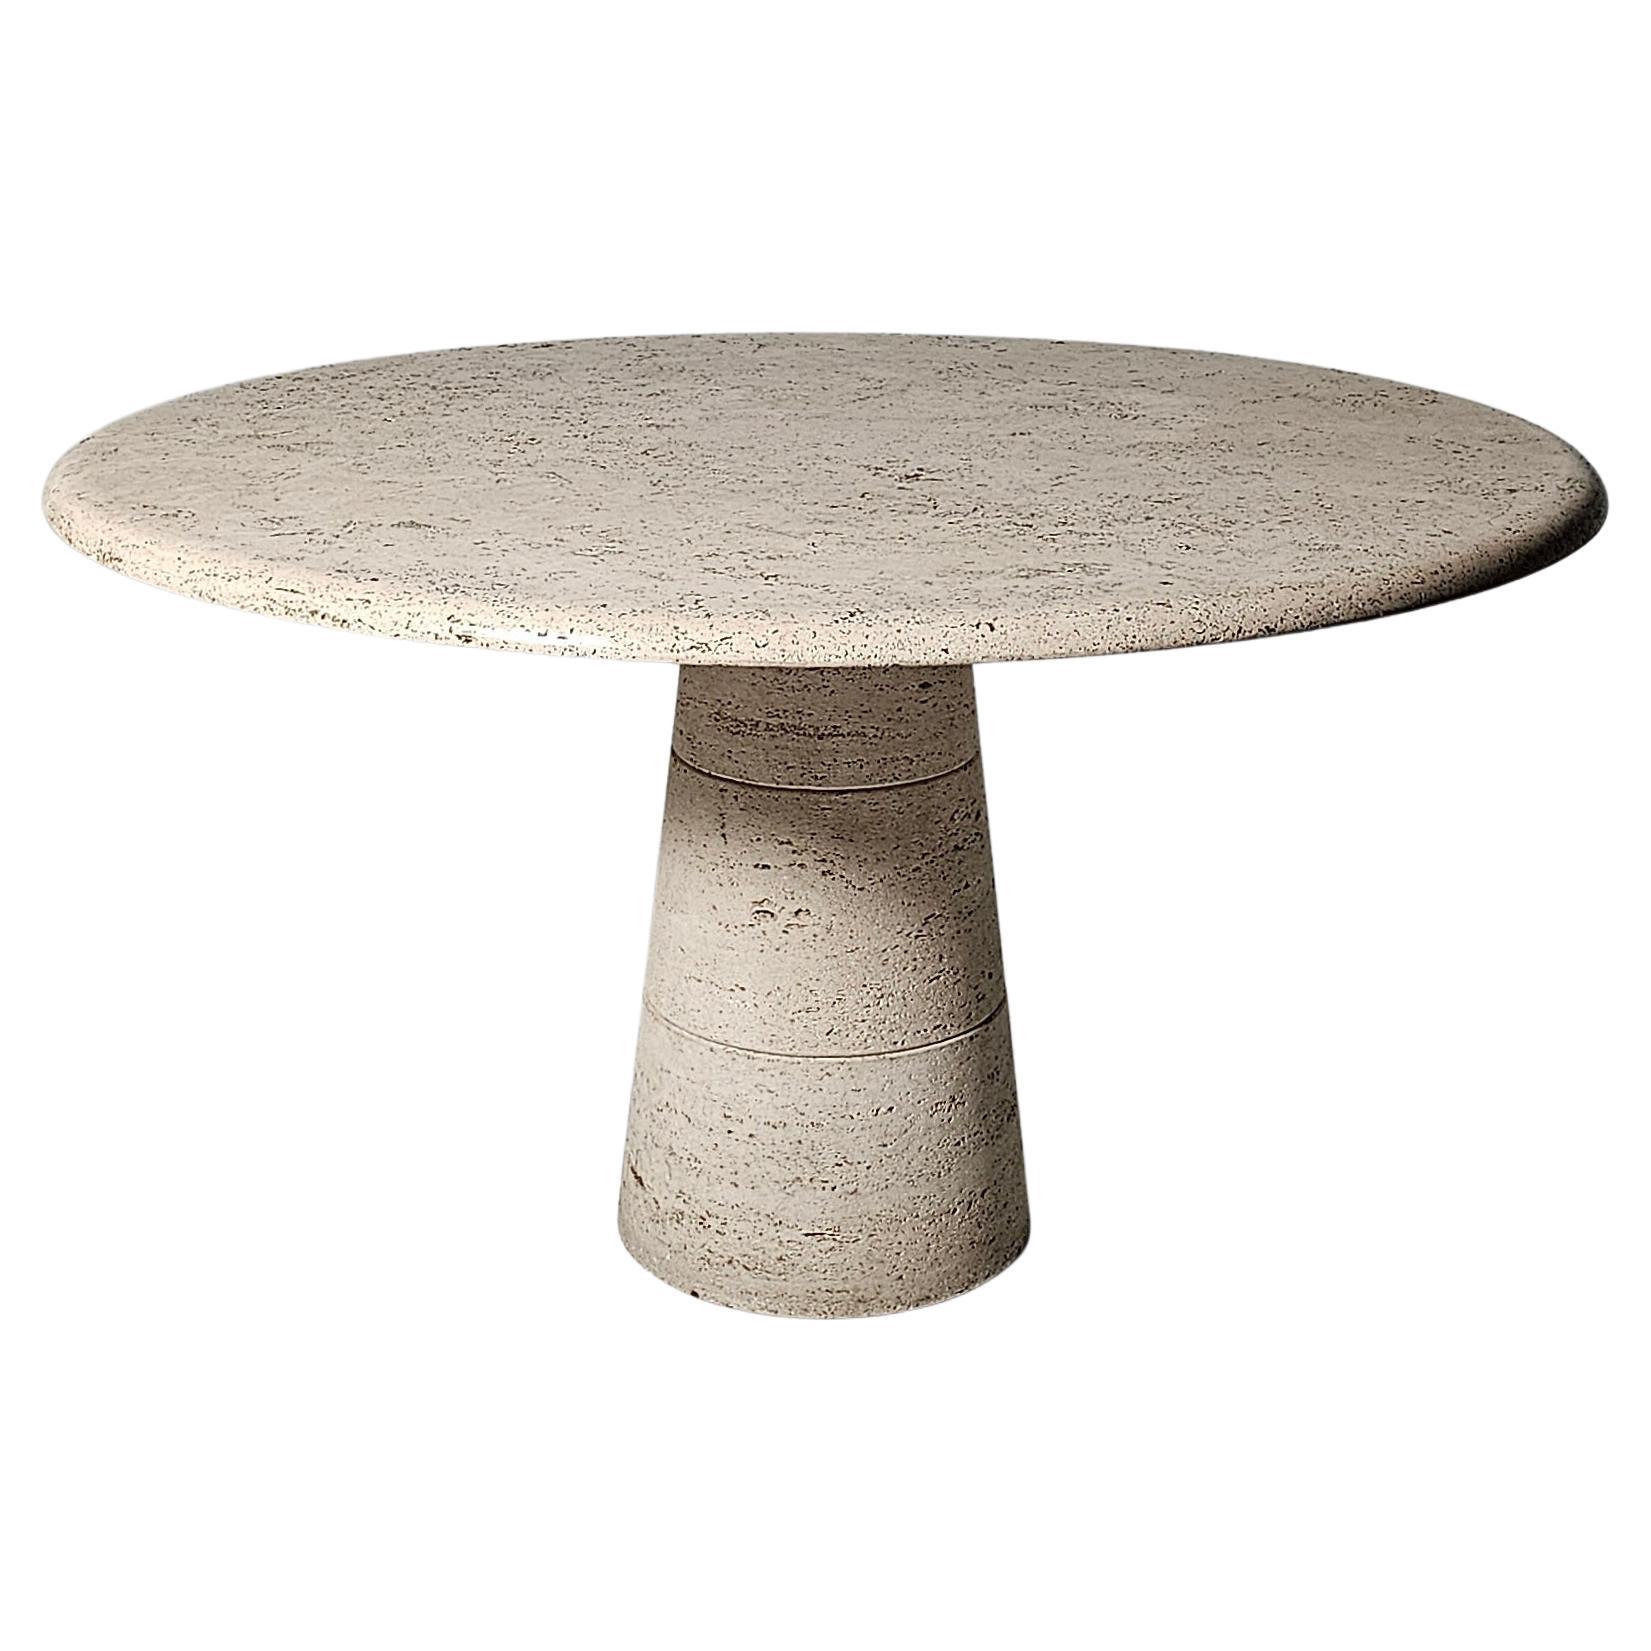 Travertine round dining table by Angelo Mangiarotti for Up&Up, 1970s